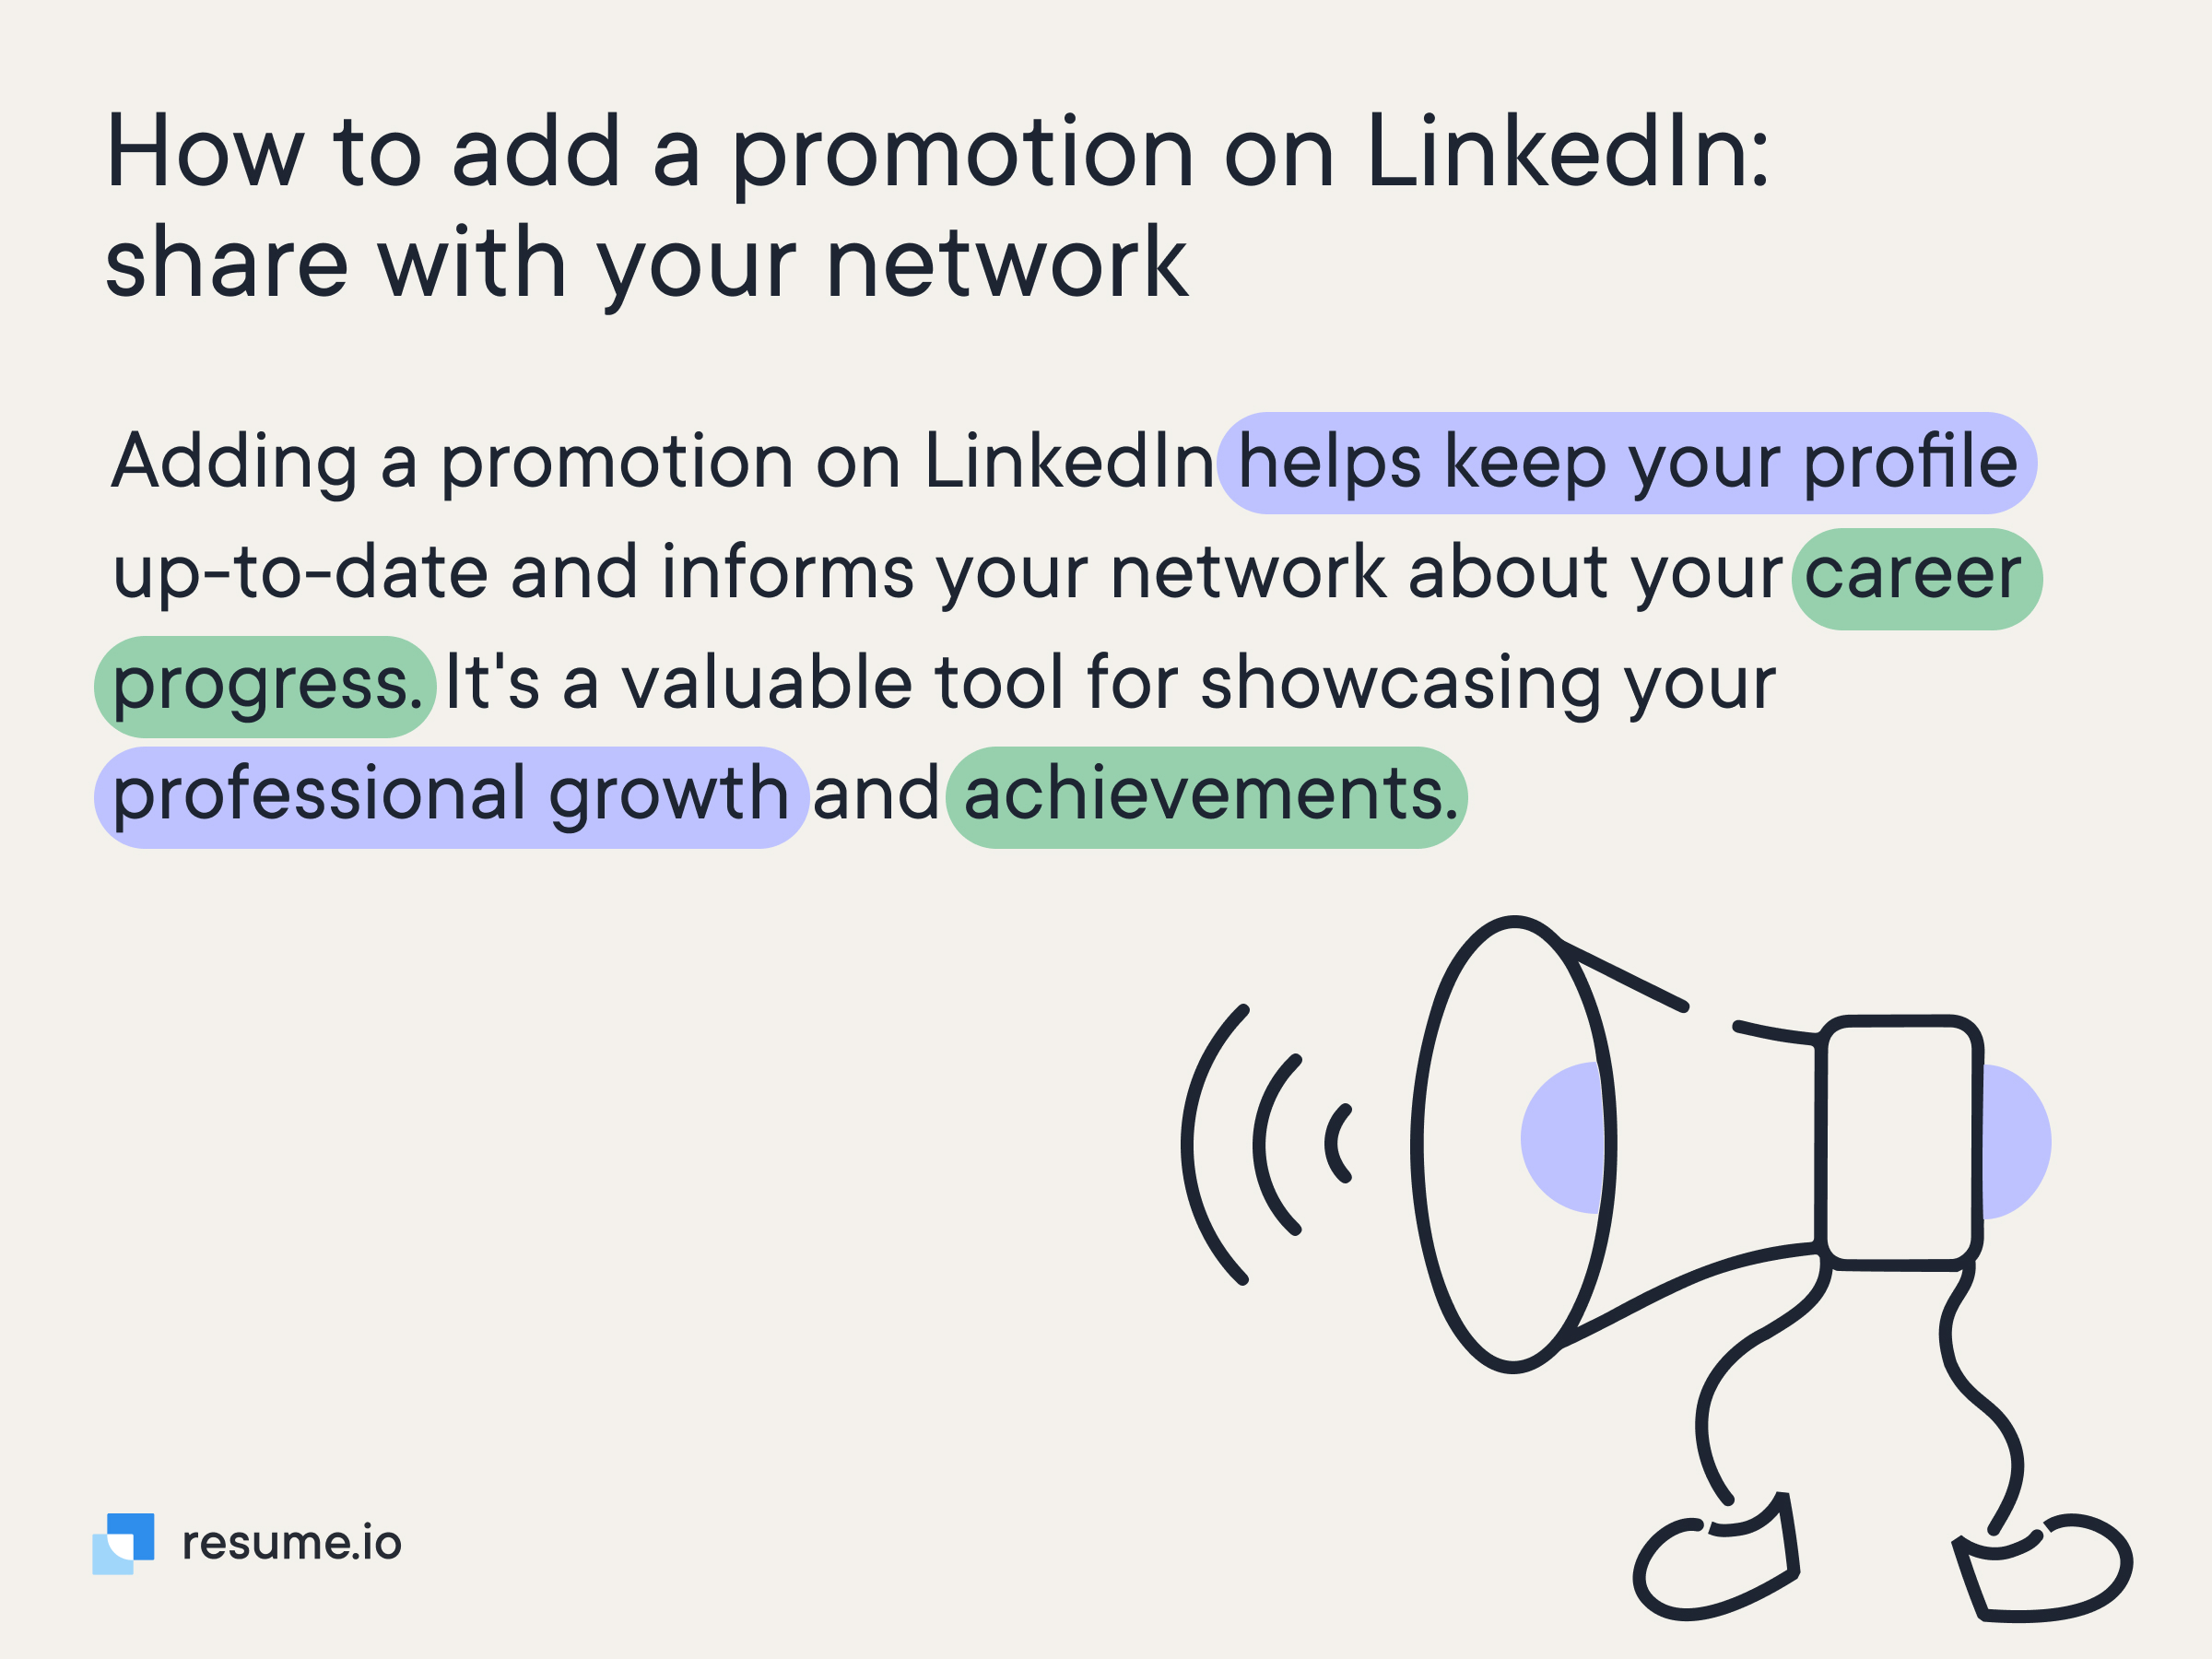 Adding a promotion helps keep your profile up-to-date